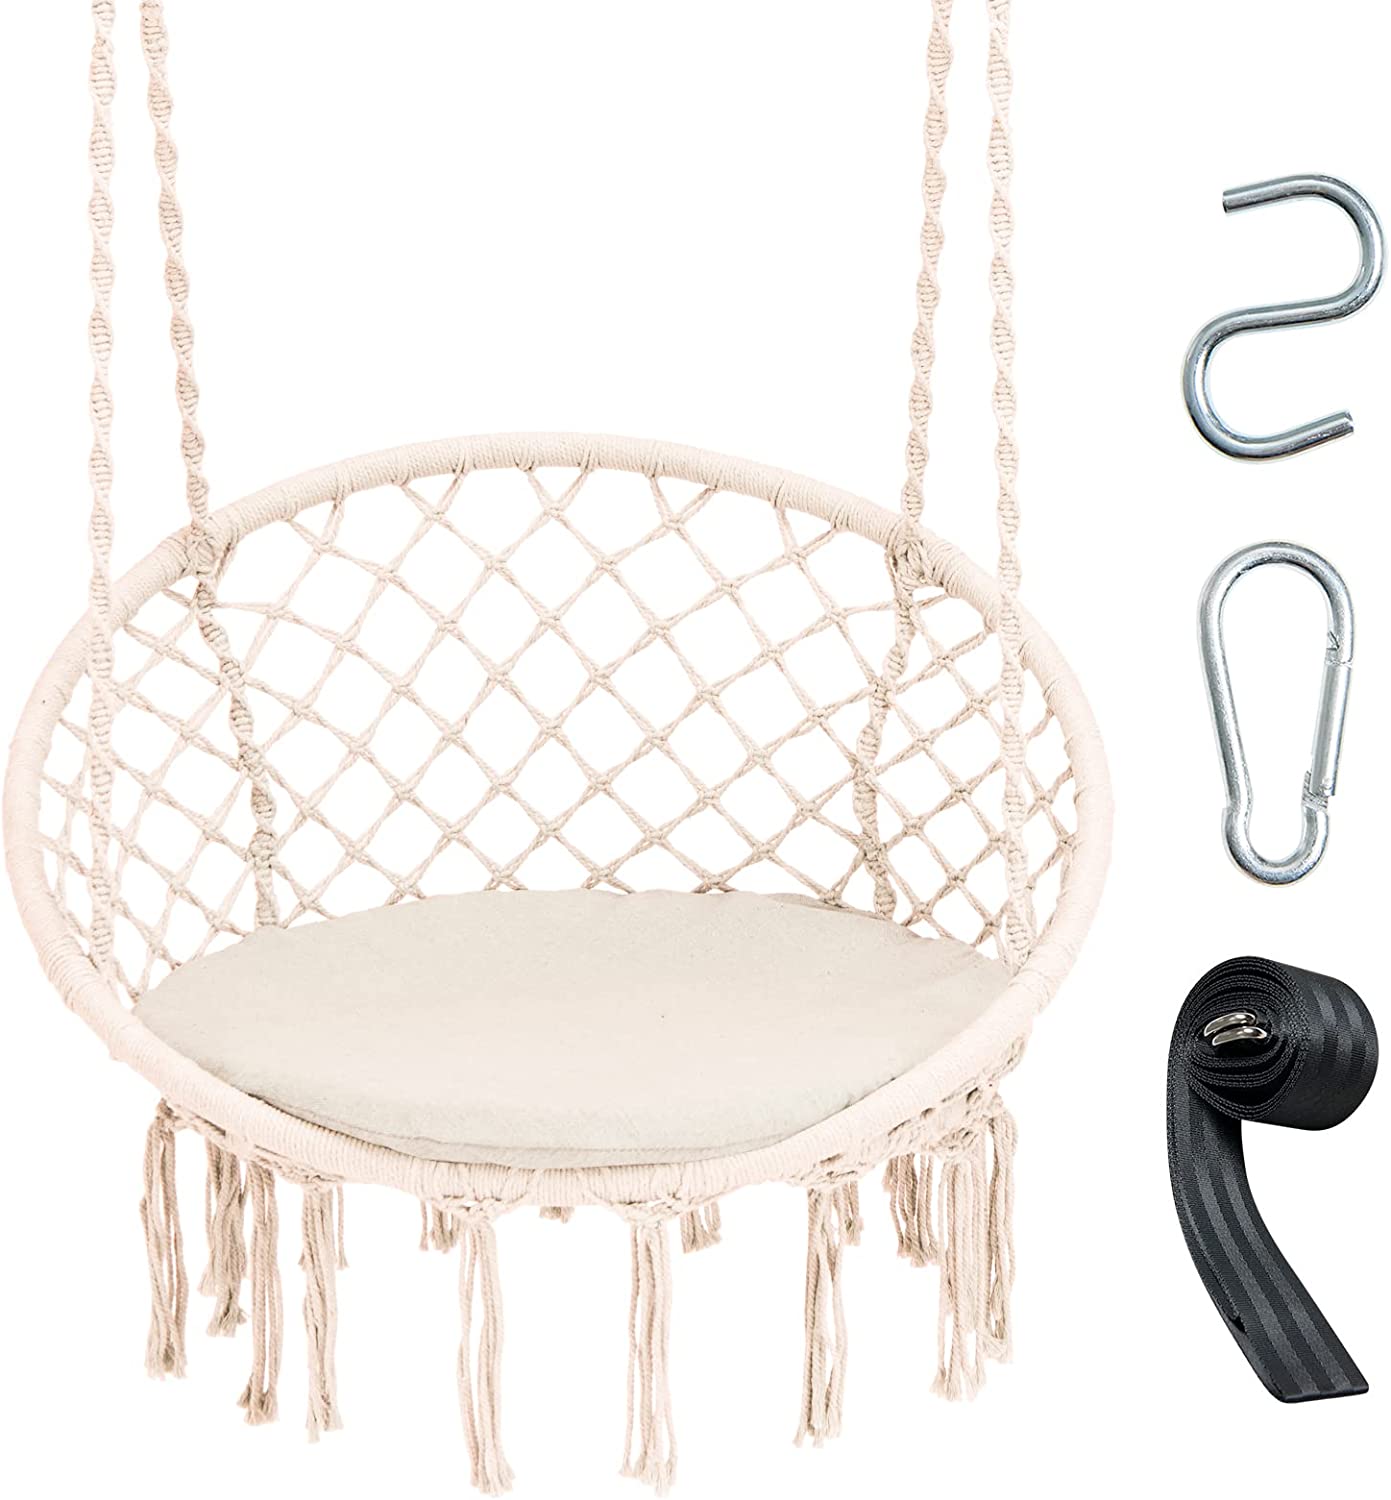 Hammock Chair Macrame Swing - Hanging Chair with Cushion and Hardware Kit,  Indoor Swing for Hammock Stand, Patio, Balcony, Living Room, 330 LBS Weight Capacity, Beige - image 1 of 9